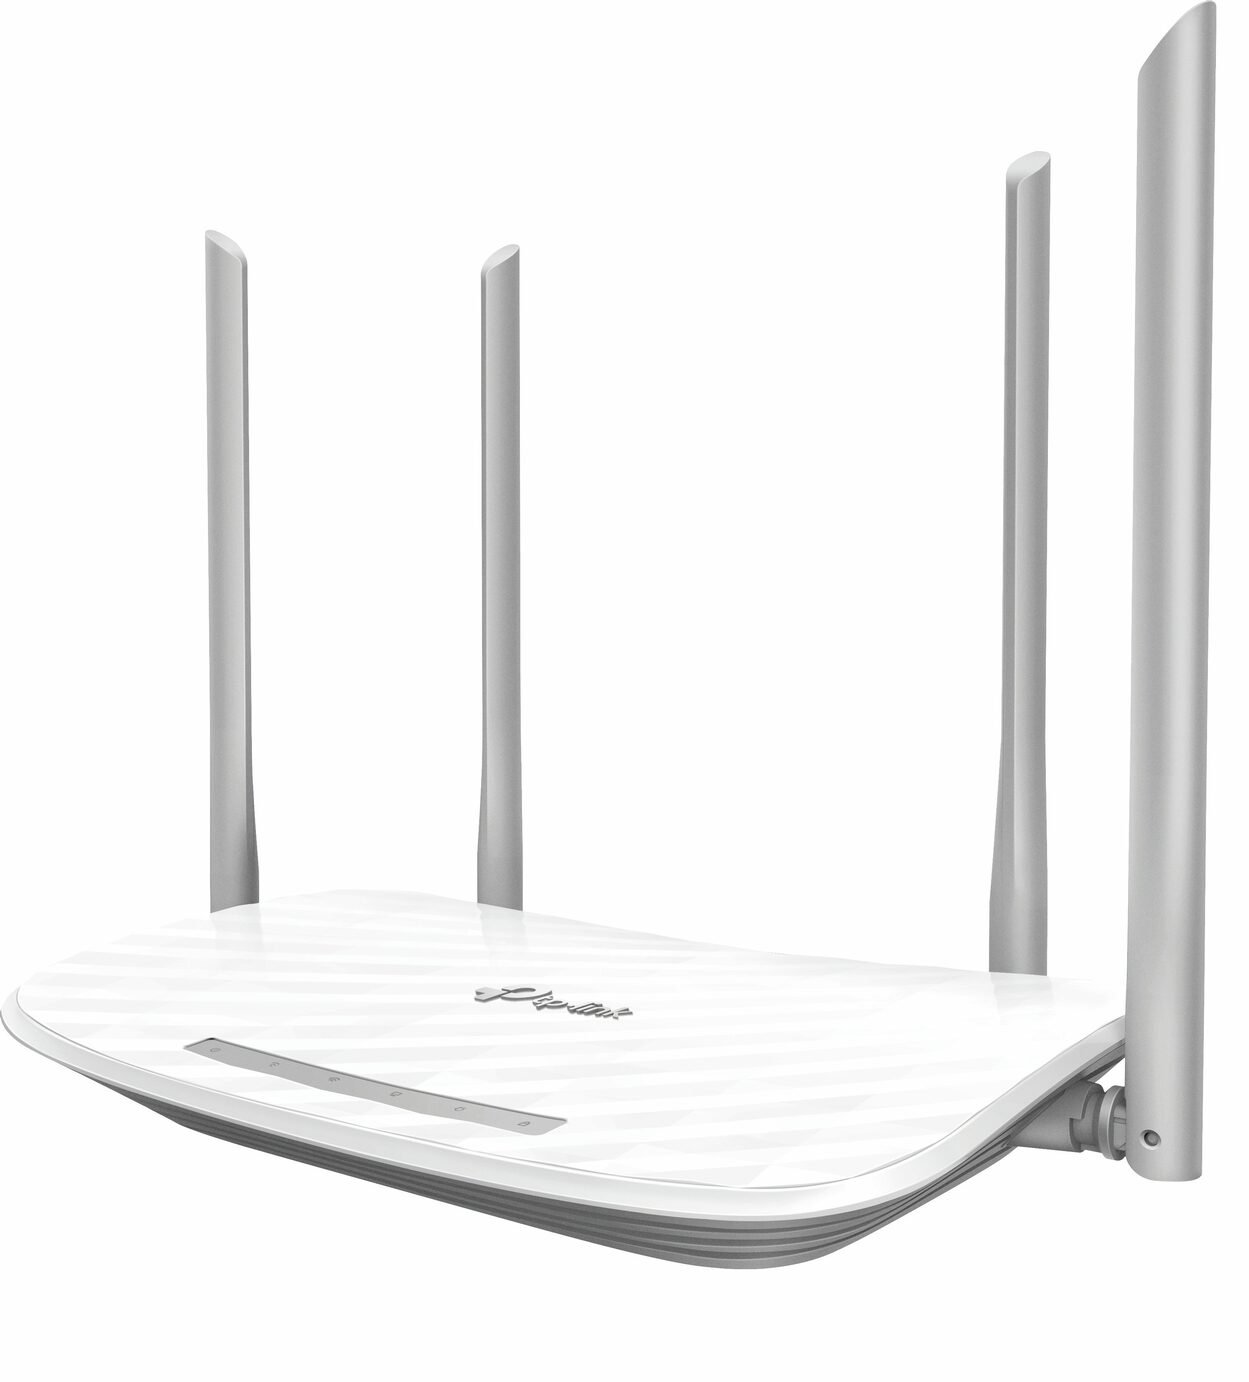 TP-Link Archer C50 AC1200 Dual Band Wireless Router Review